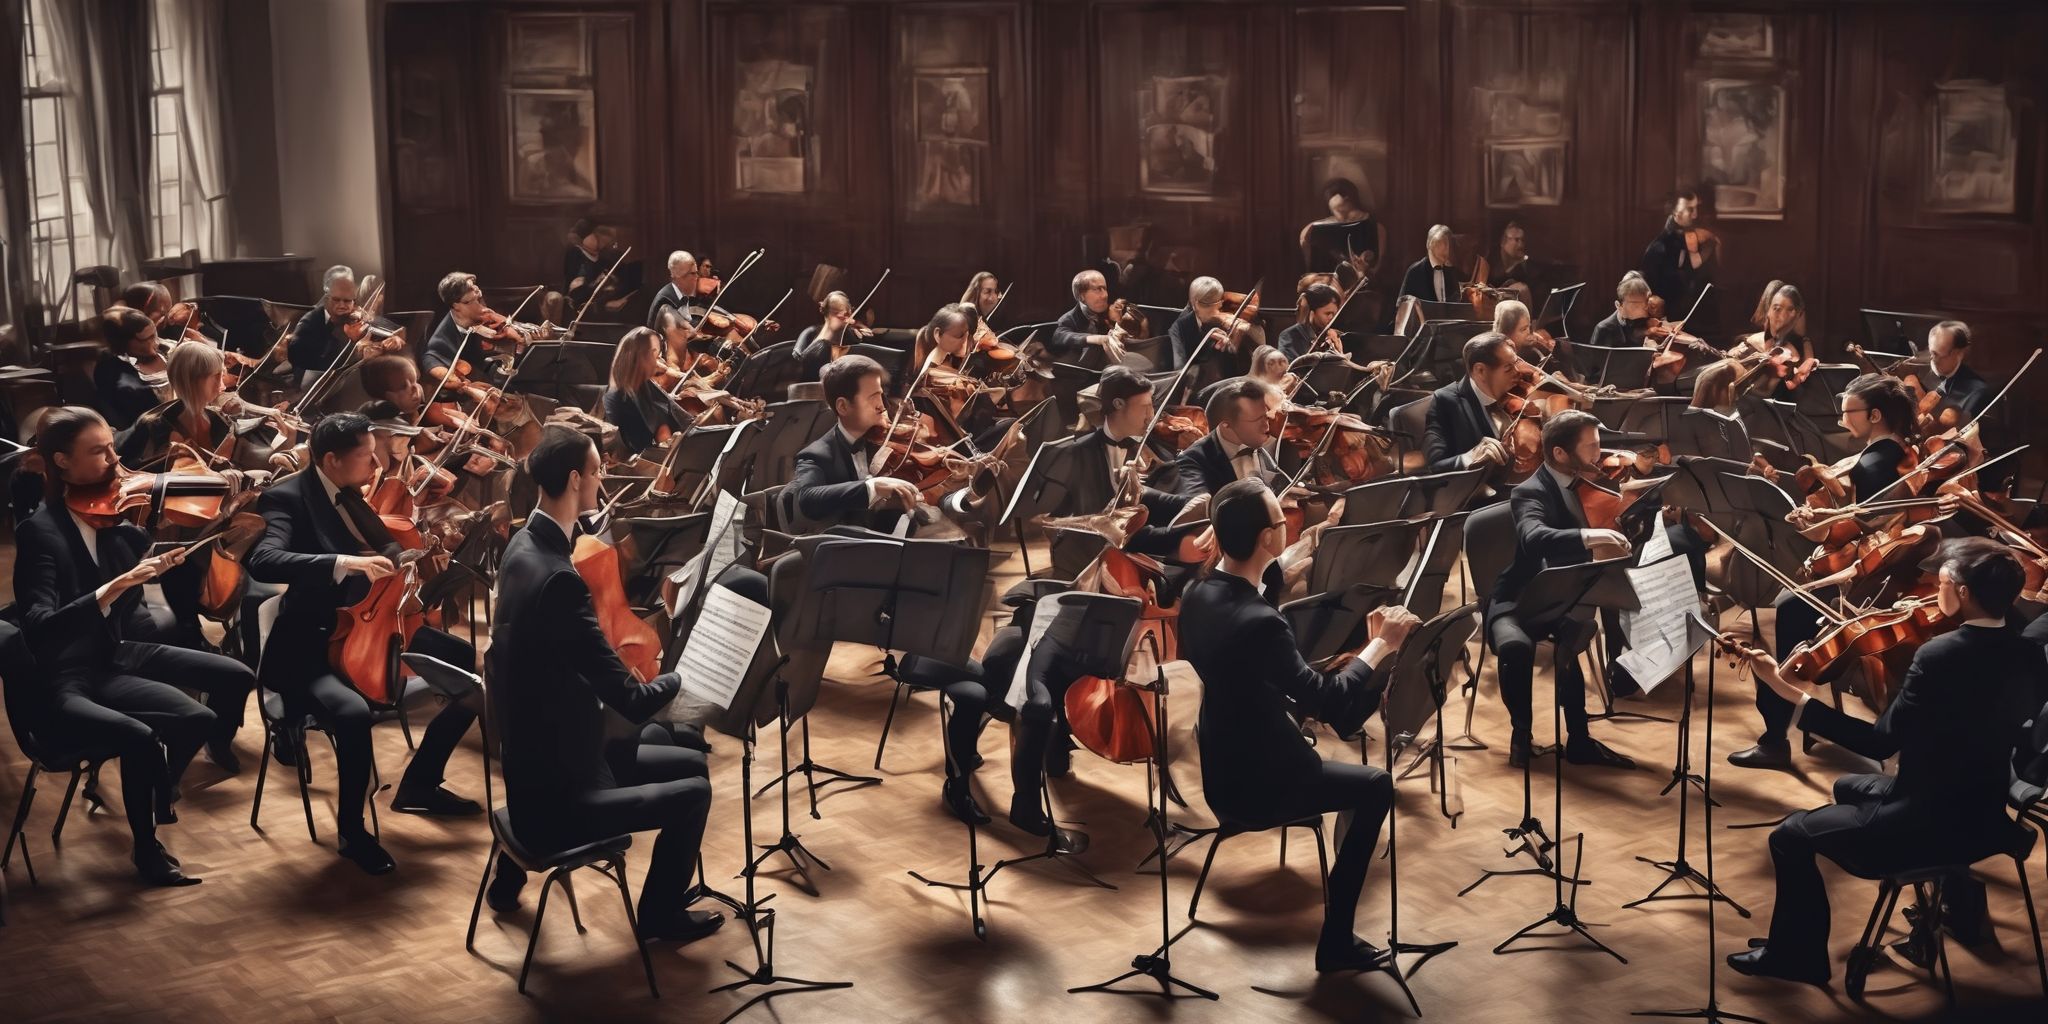 Orchestra  in realistic, photographic style